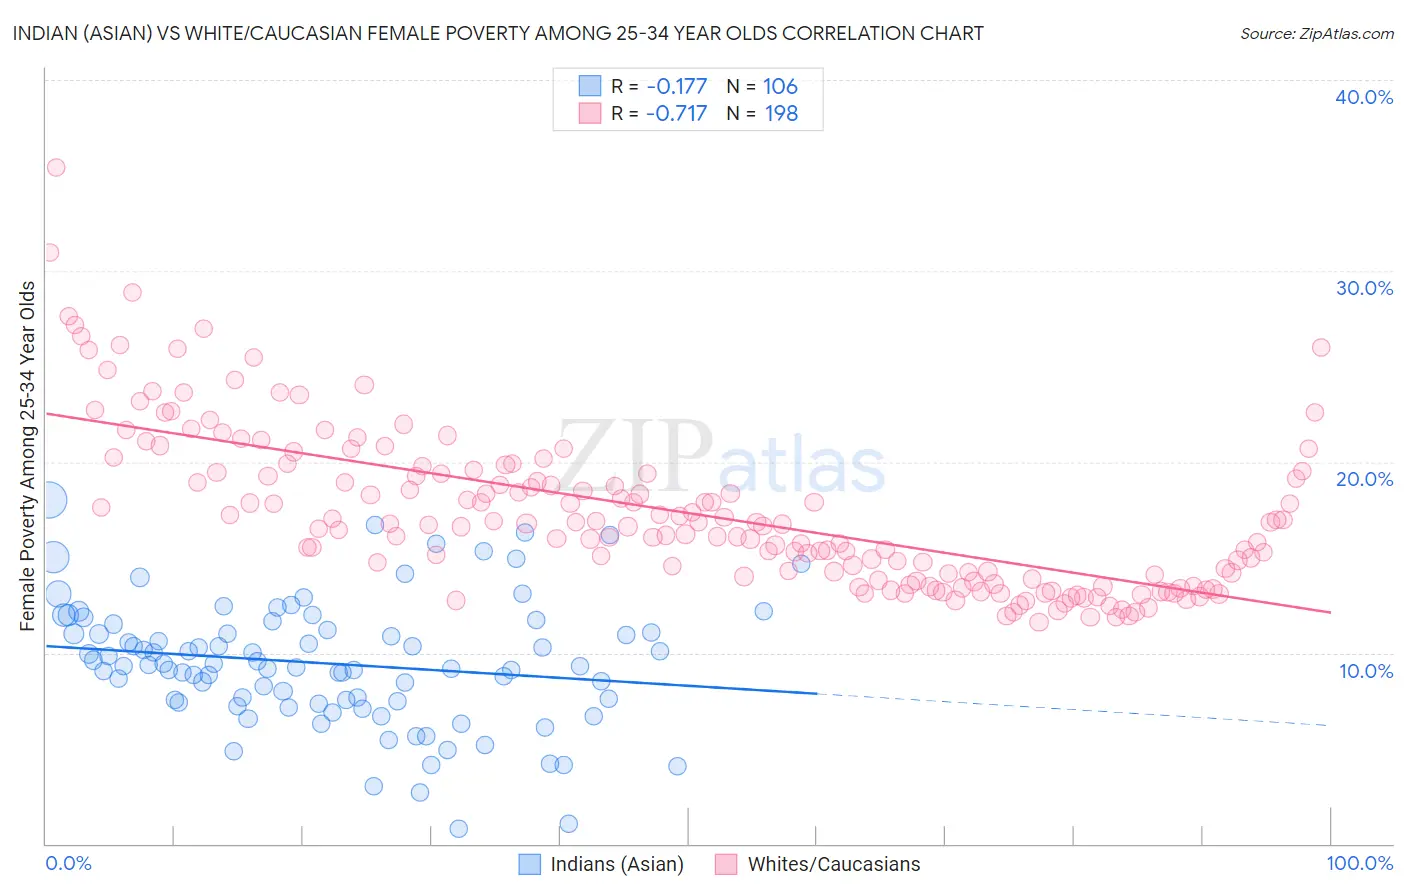 Indian (Asian) vs White/Caucasian Female Poverty Among 25-34 Year Olds